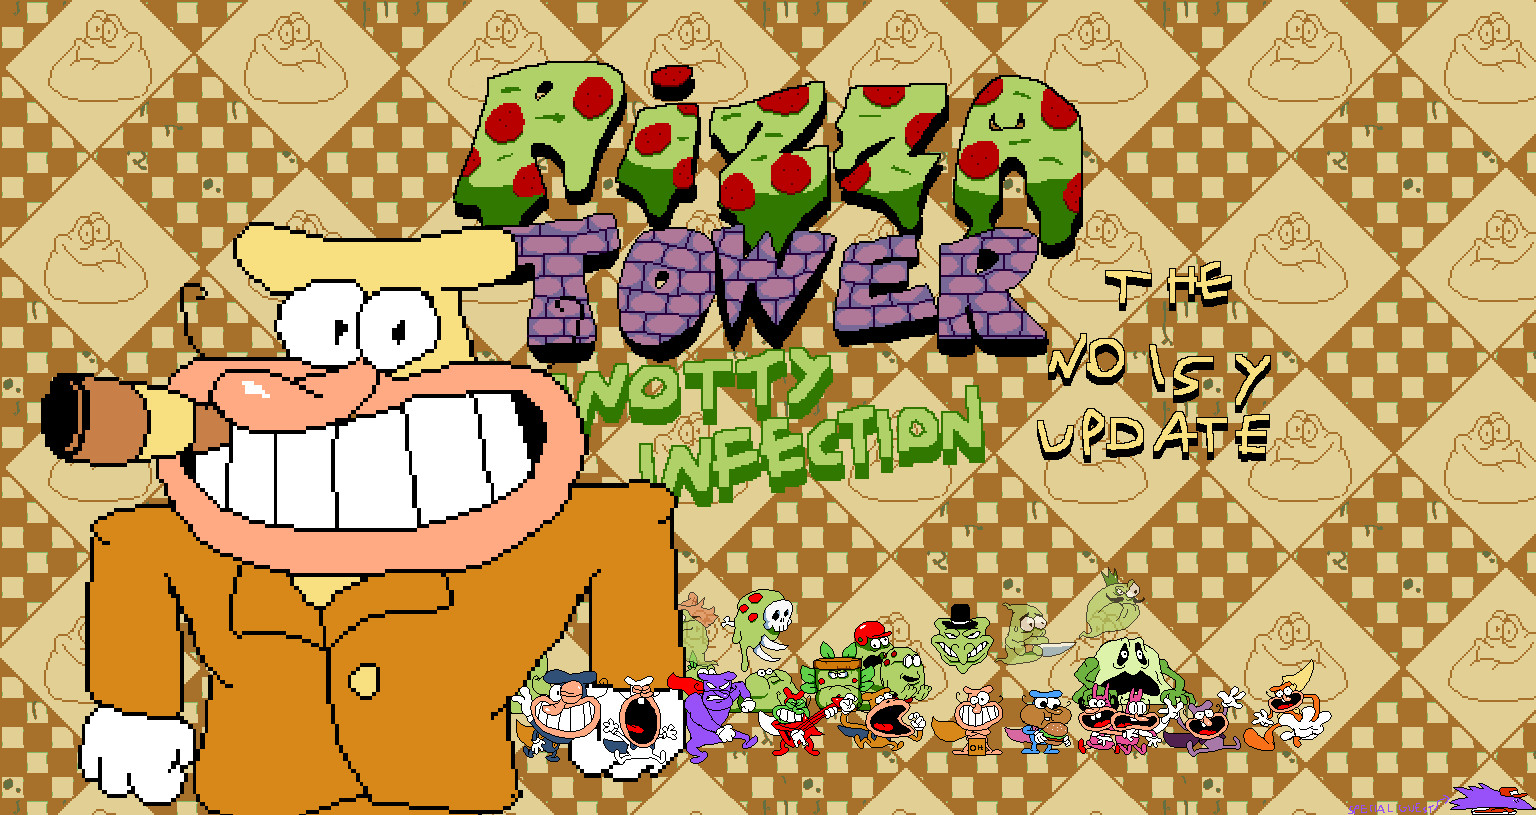 Using pizza tower online, I make a web port of pizza tower using